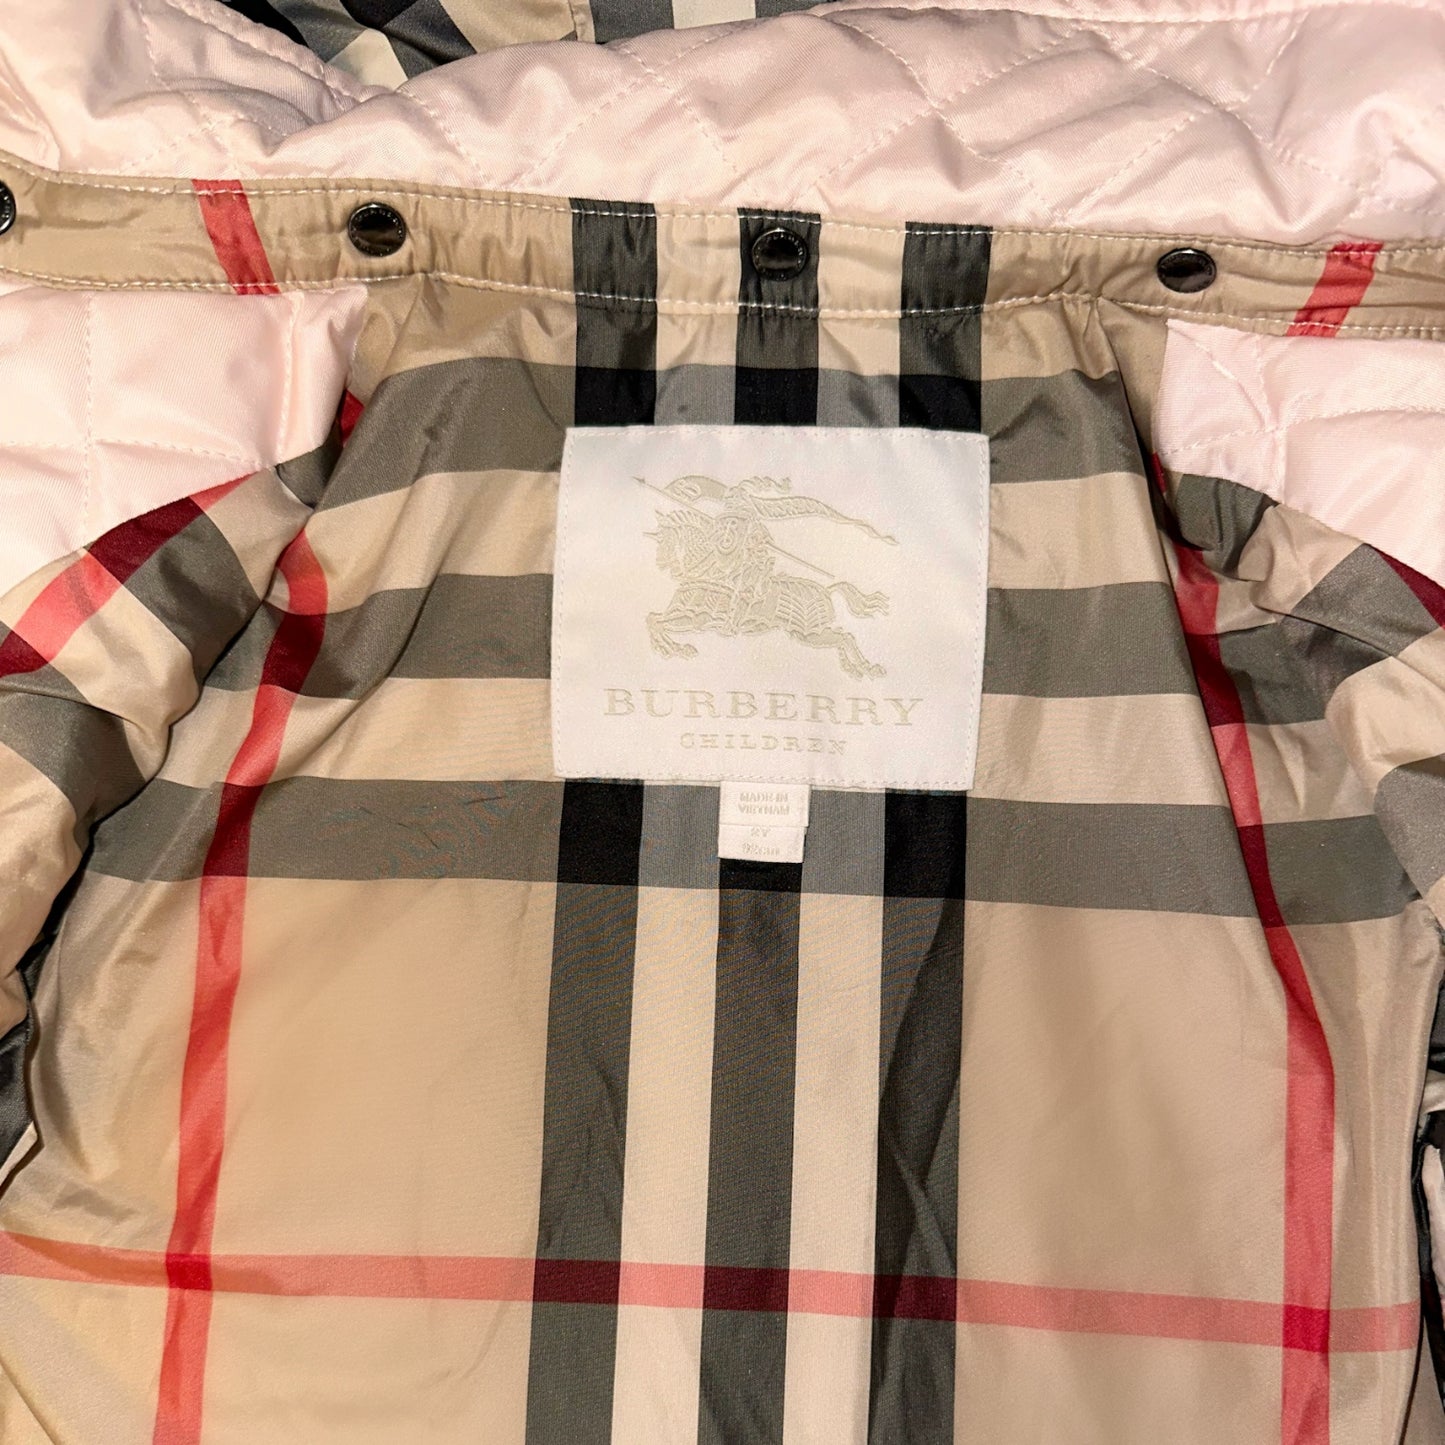 Burberry Pink Quilted Jacket